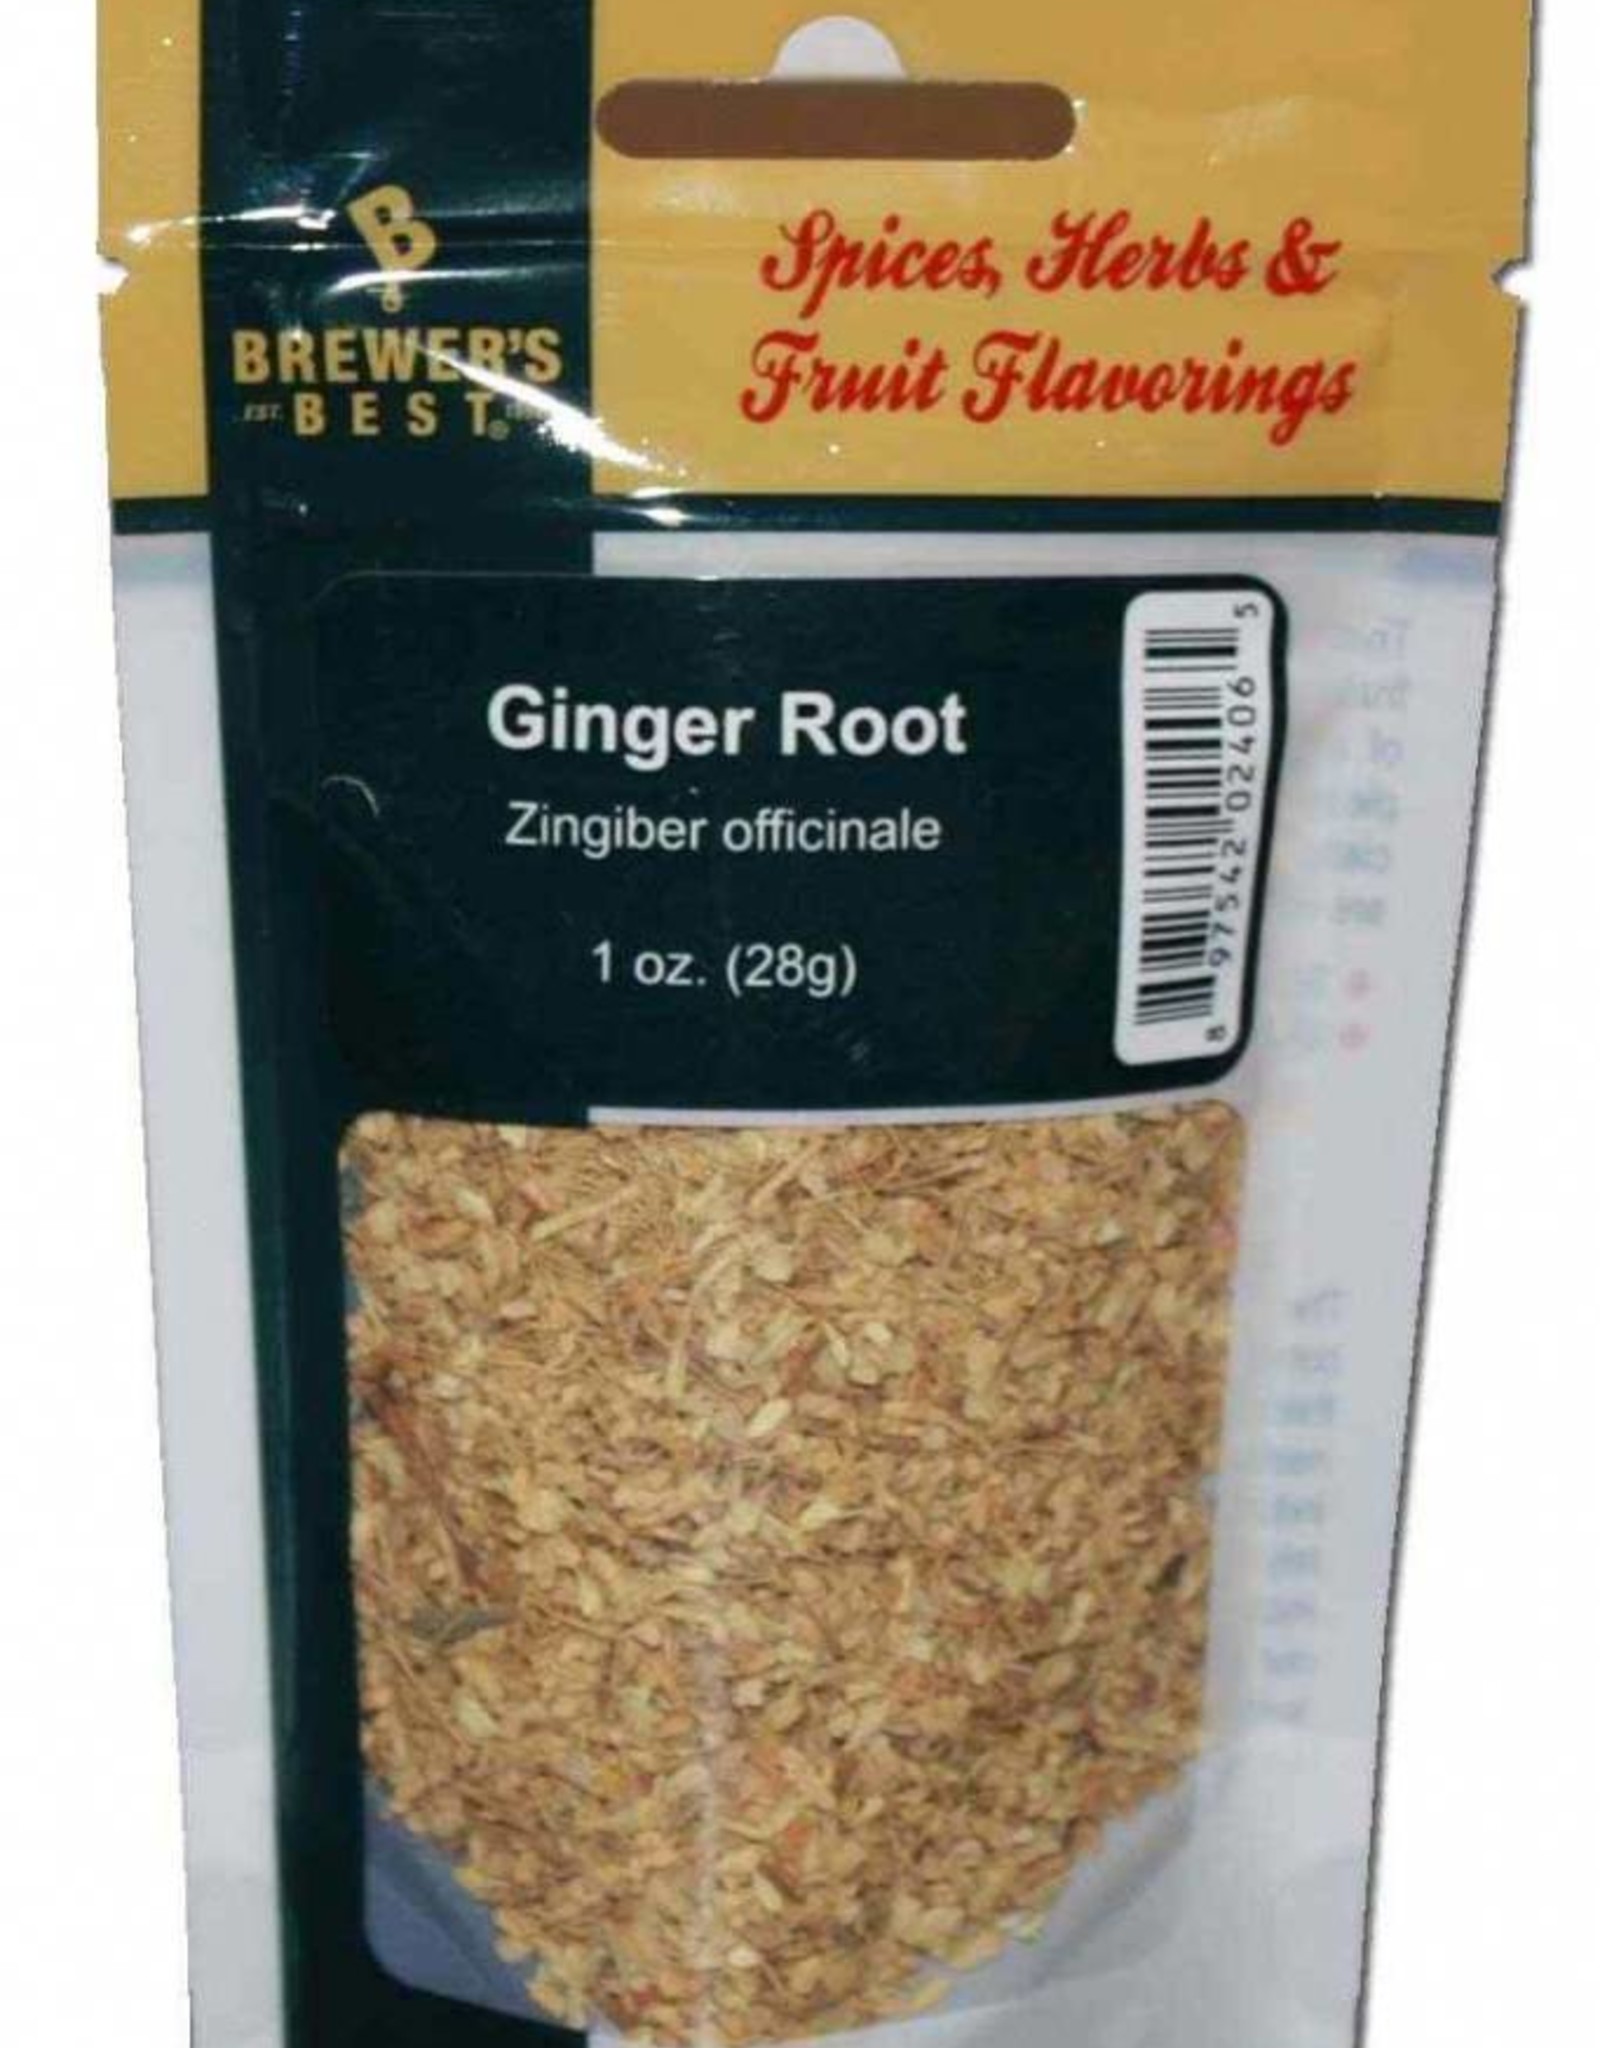 Brewer's Best Ginger Root